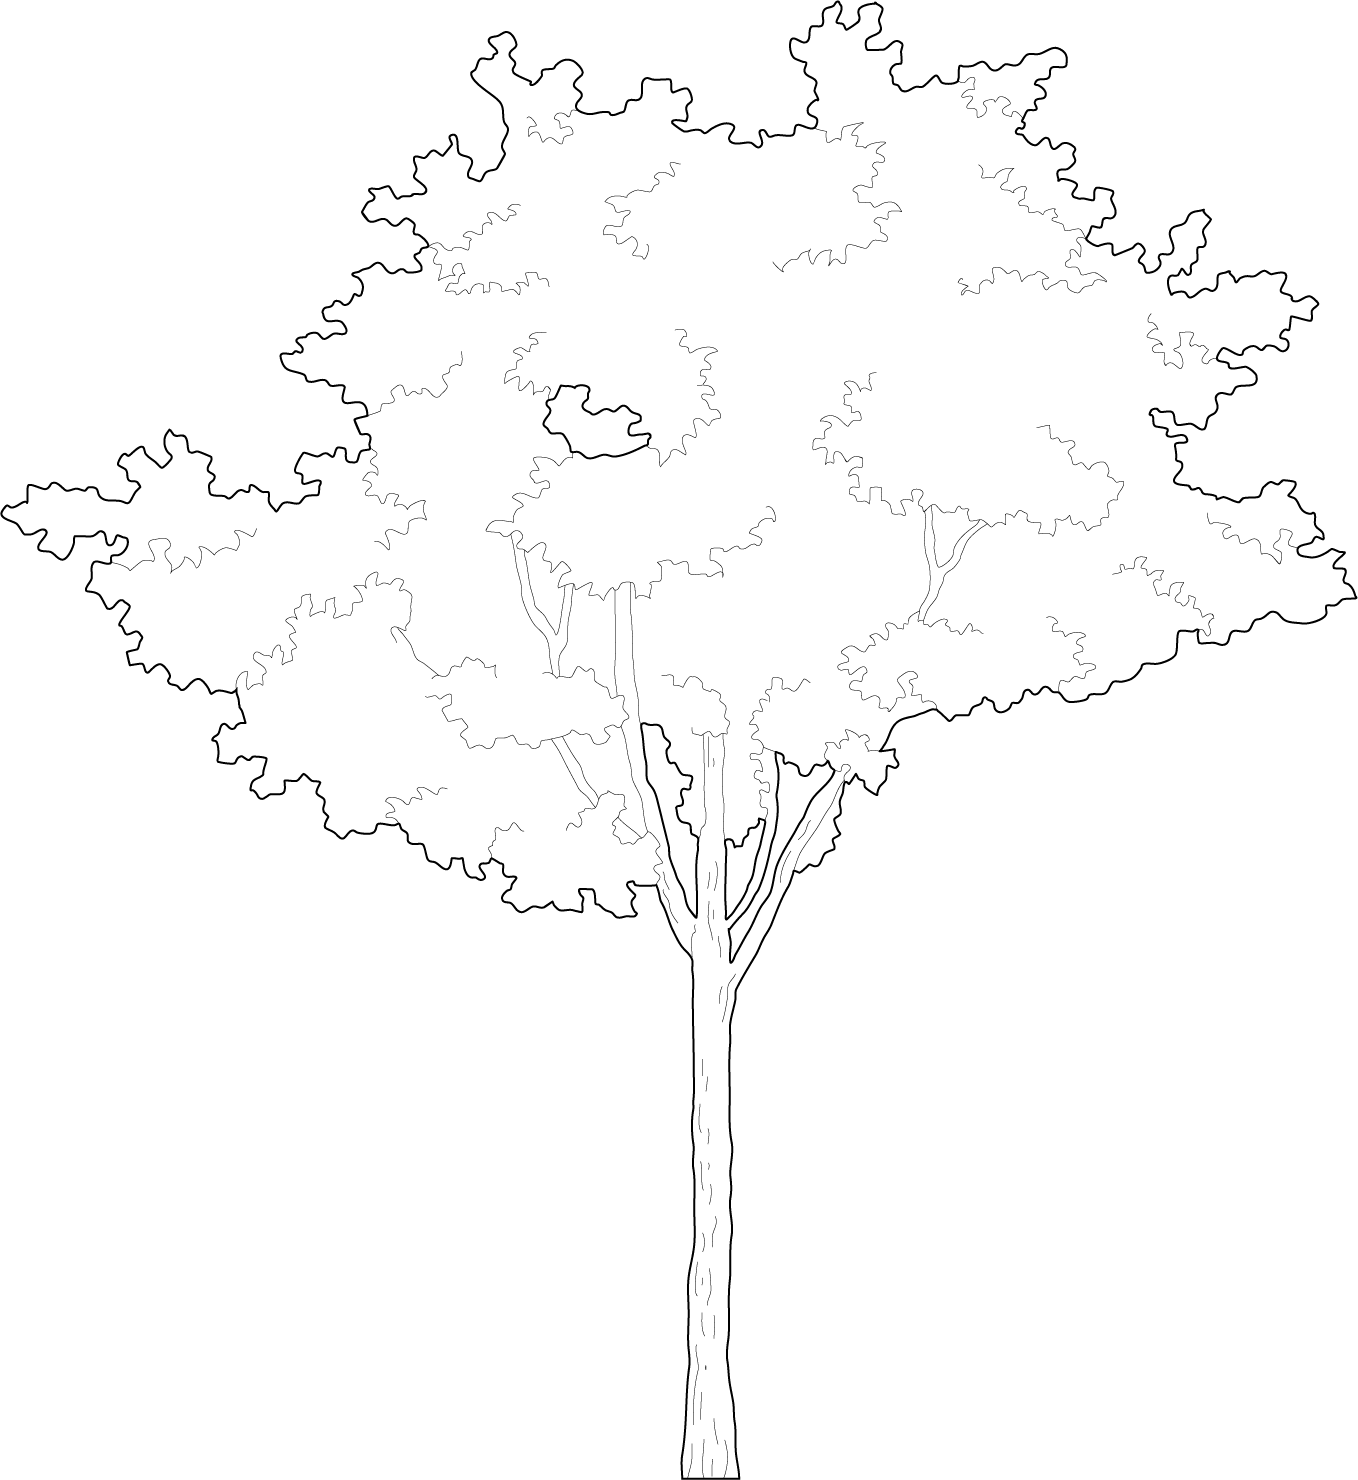 Small tree that will make any project look better cad trees